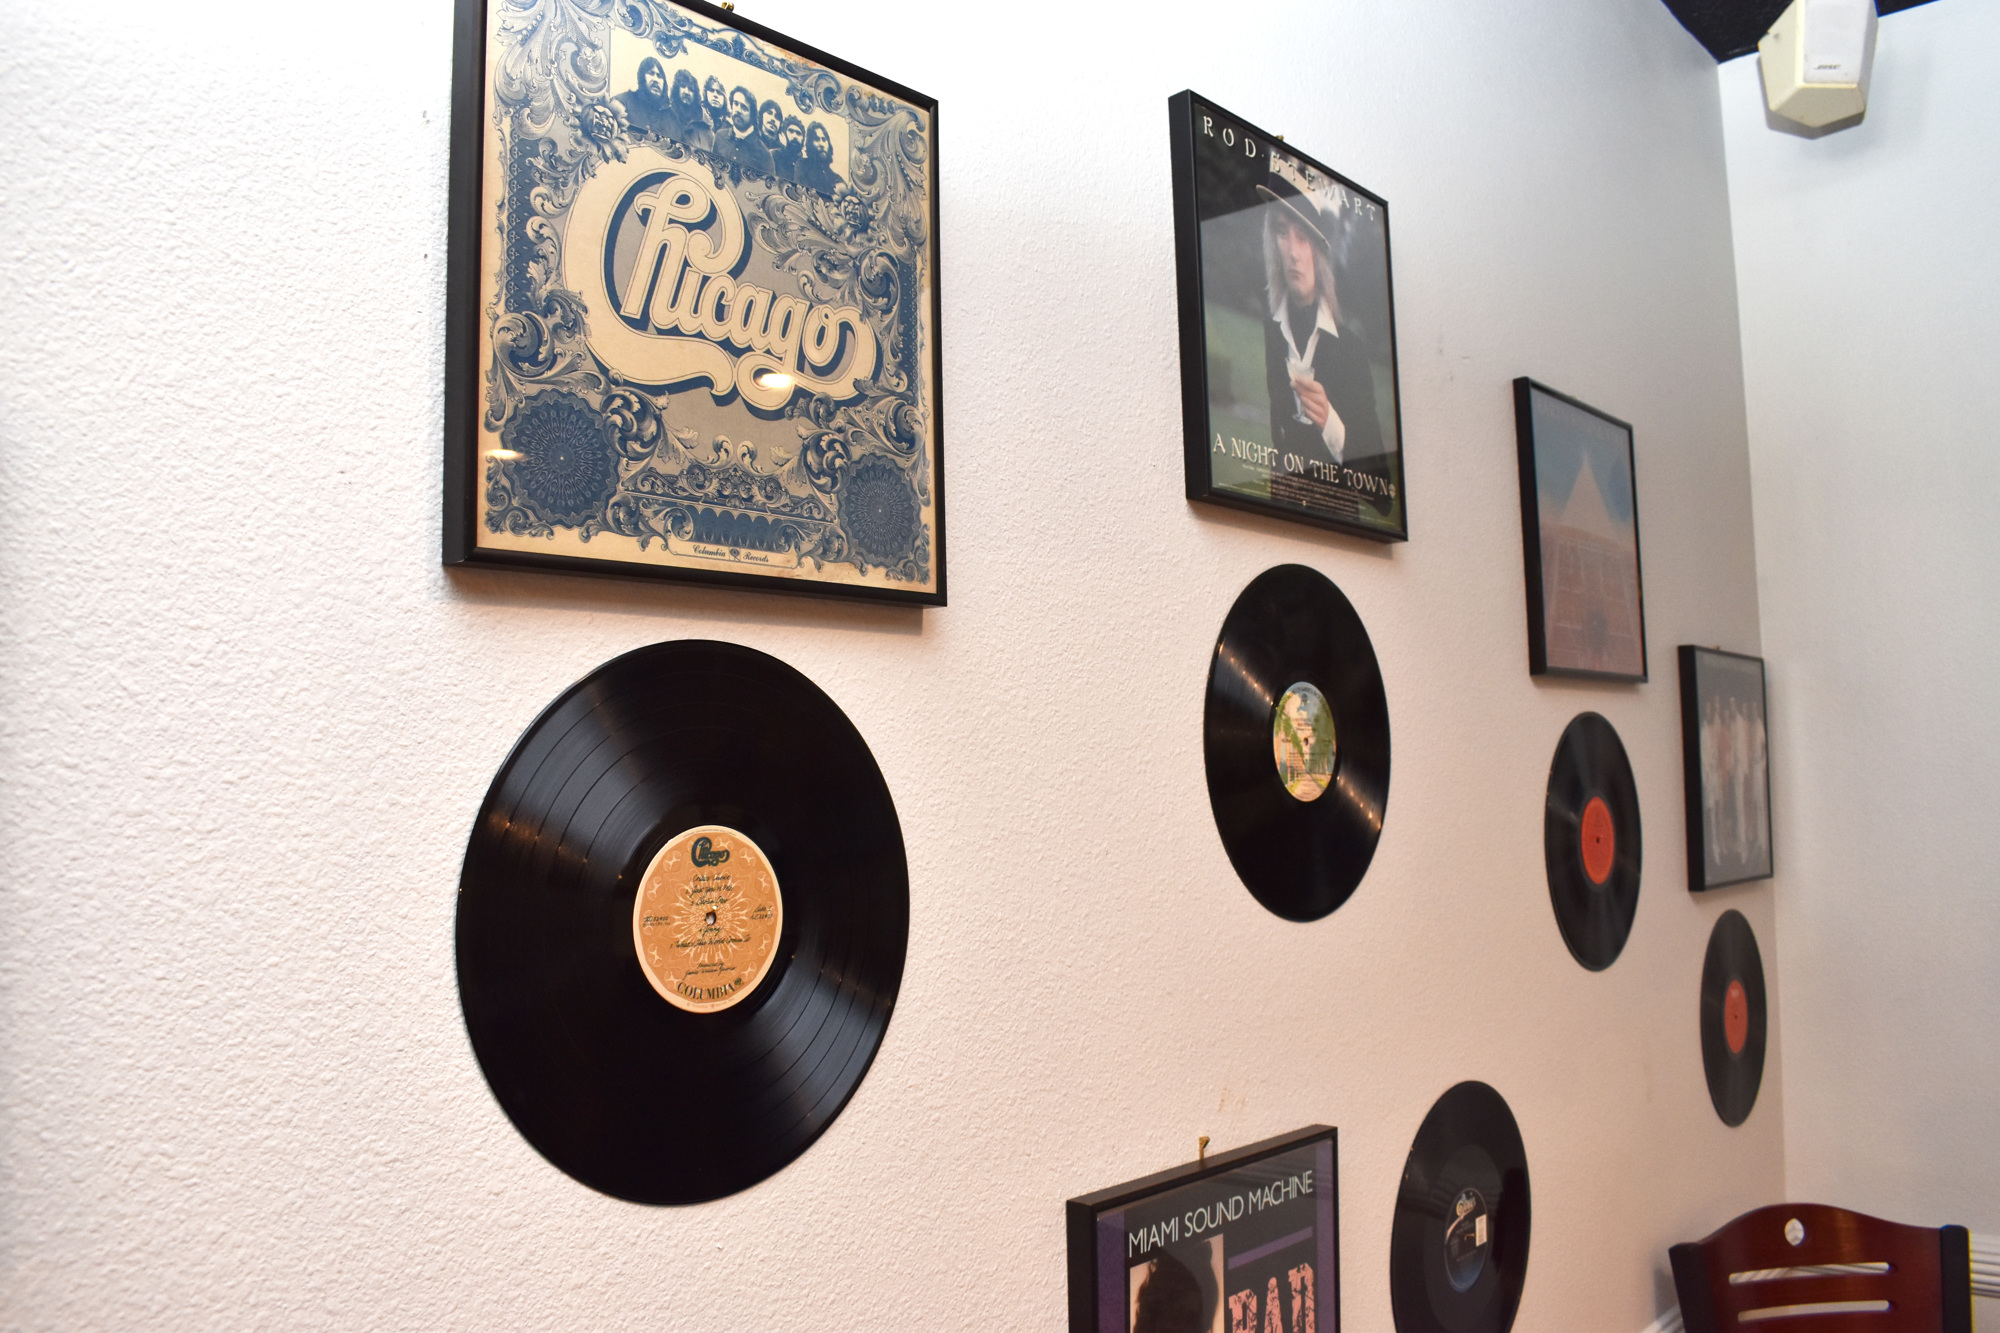 The walls of The Venue are lined with music memorabilia. Photo by Niki Kottmann